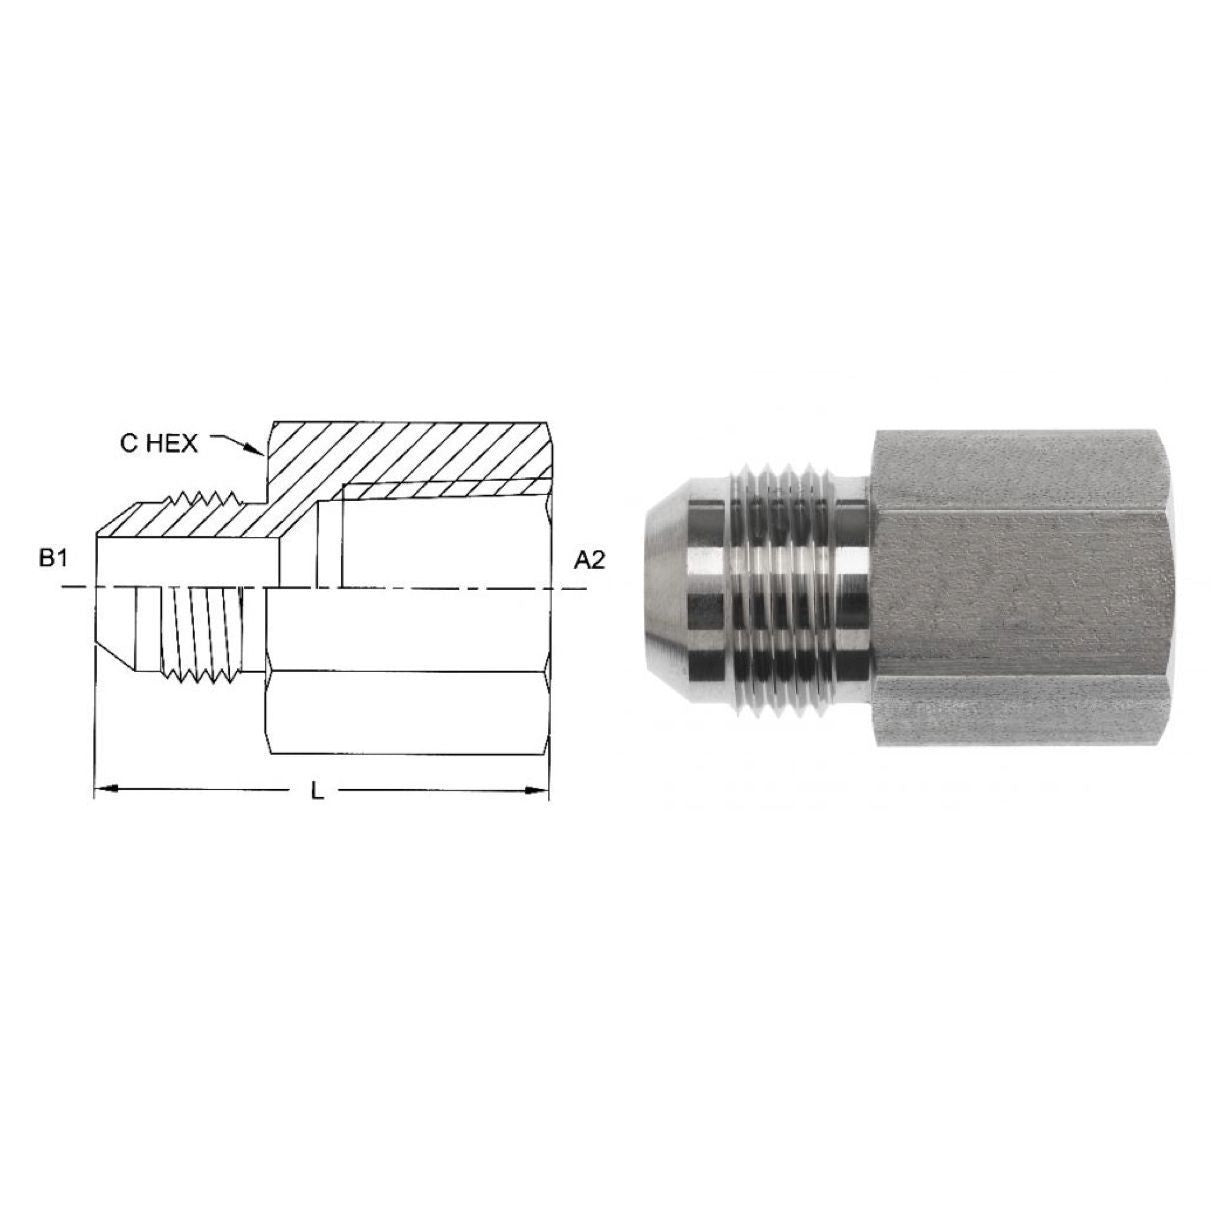 2405-04-04-SS : OneHydraulics Adapter, Straight, 0.25 (1/4") Male NPT x 0.25 (1/4") Female, Stainless Steel, 6000psi